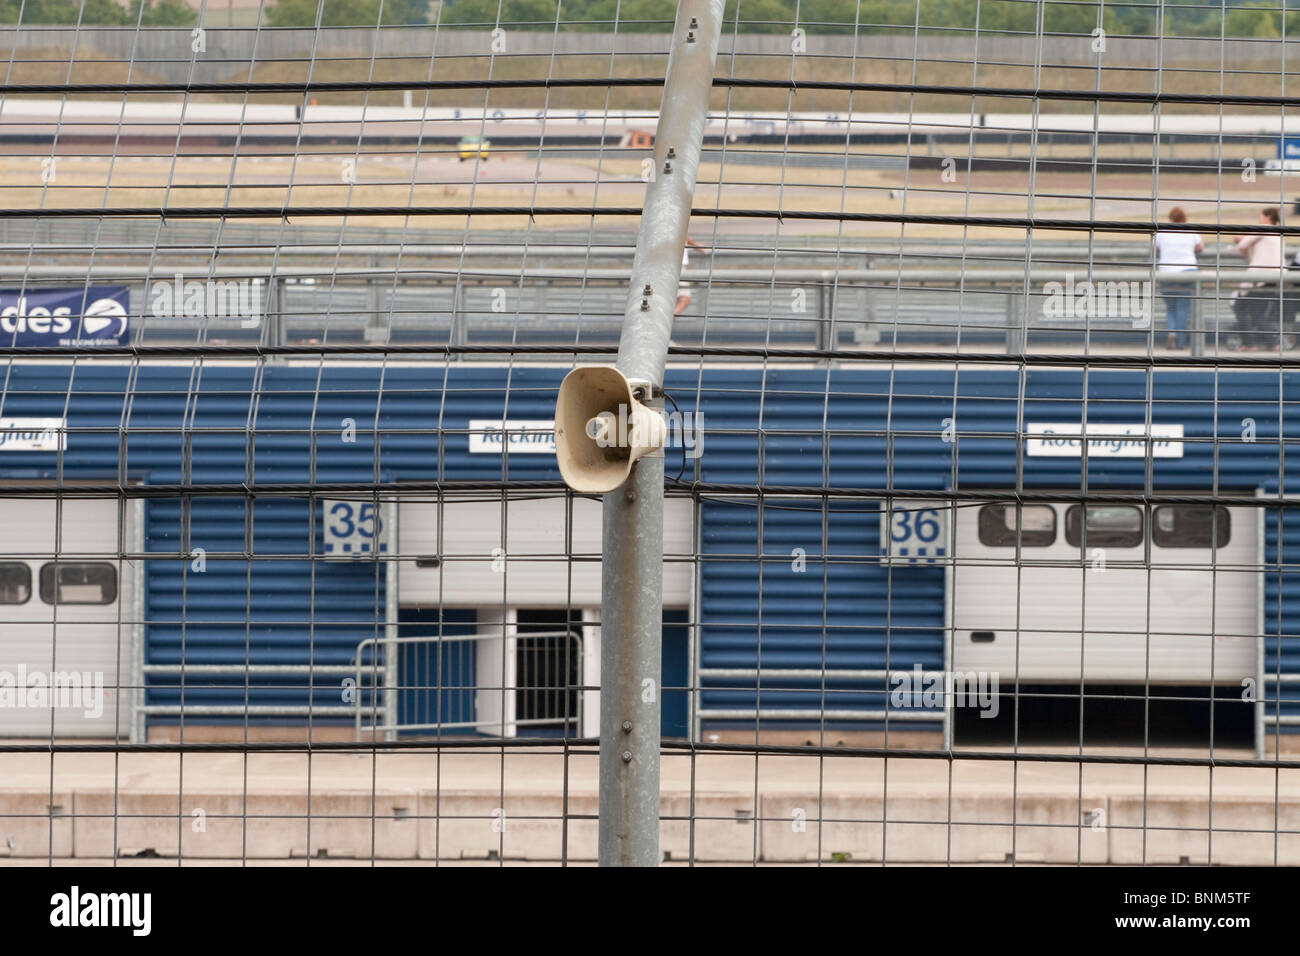 A Tannoy speaker mounted on a fence at a race circuit Stock Photo